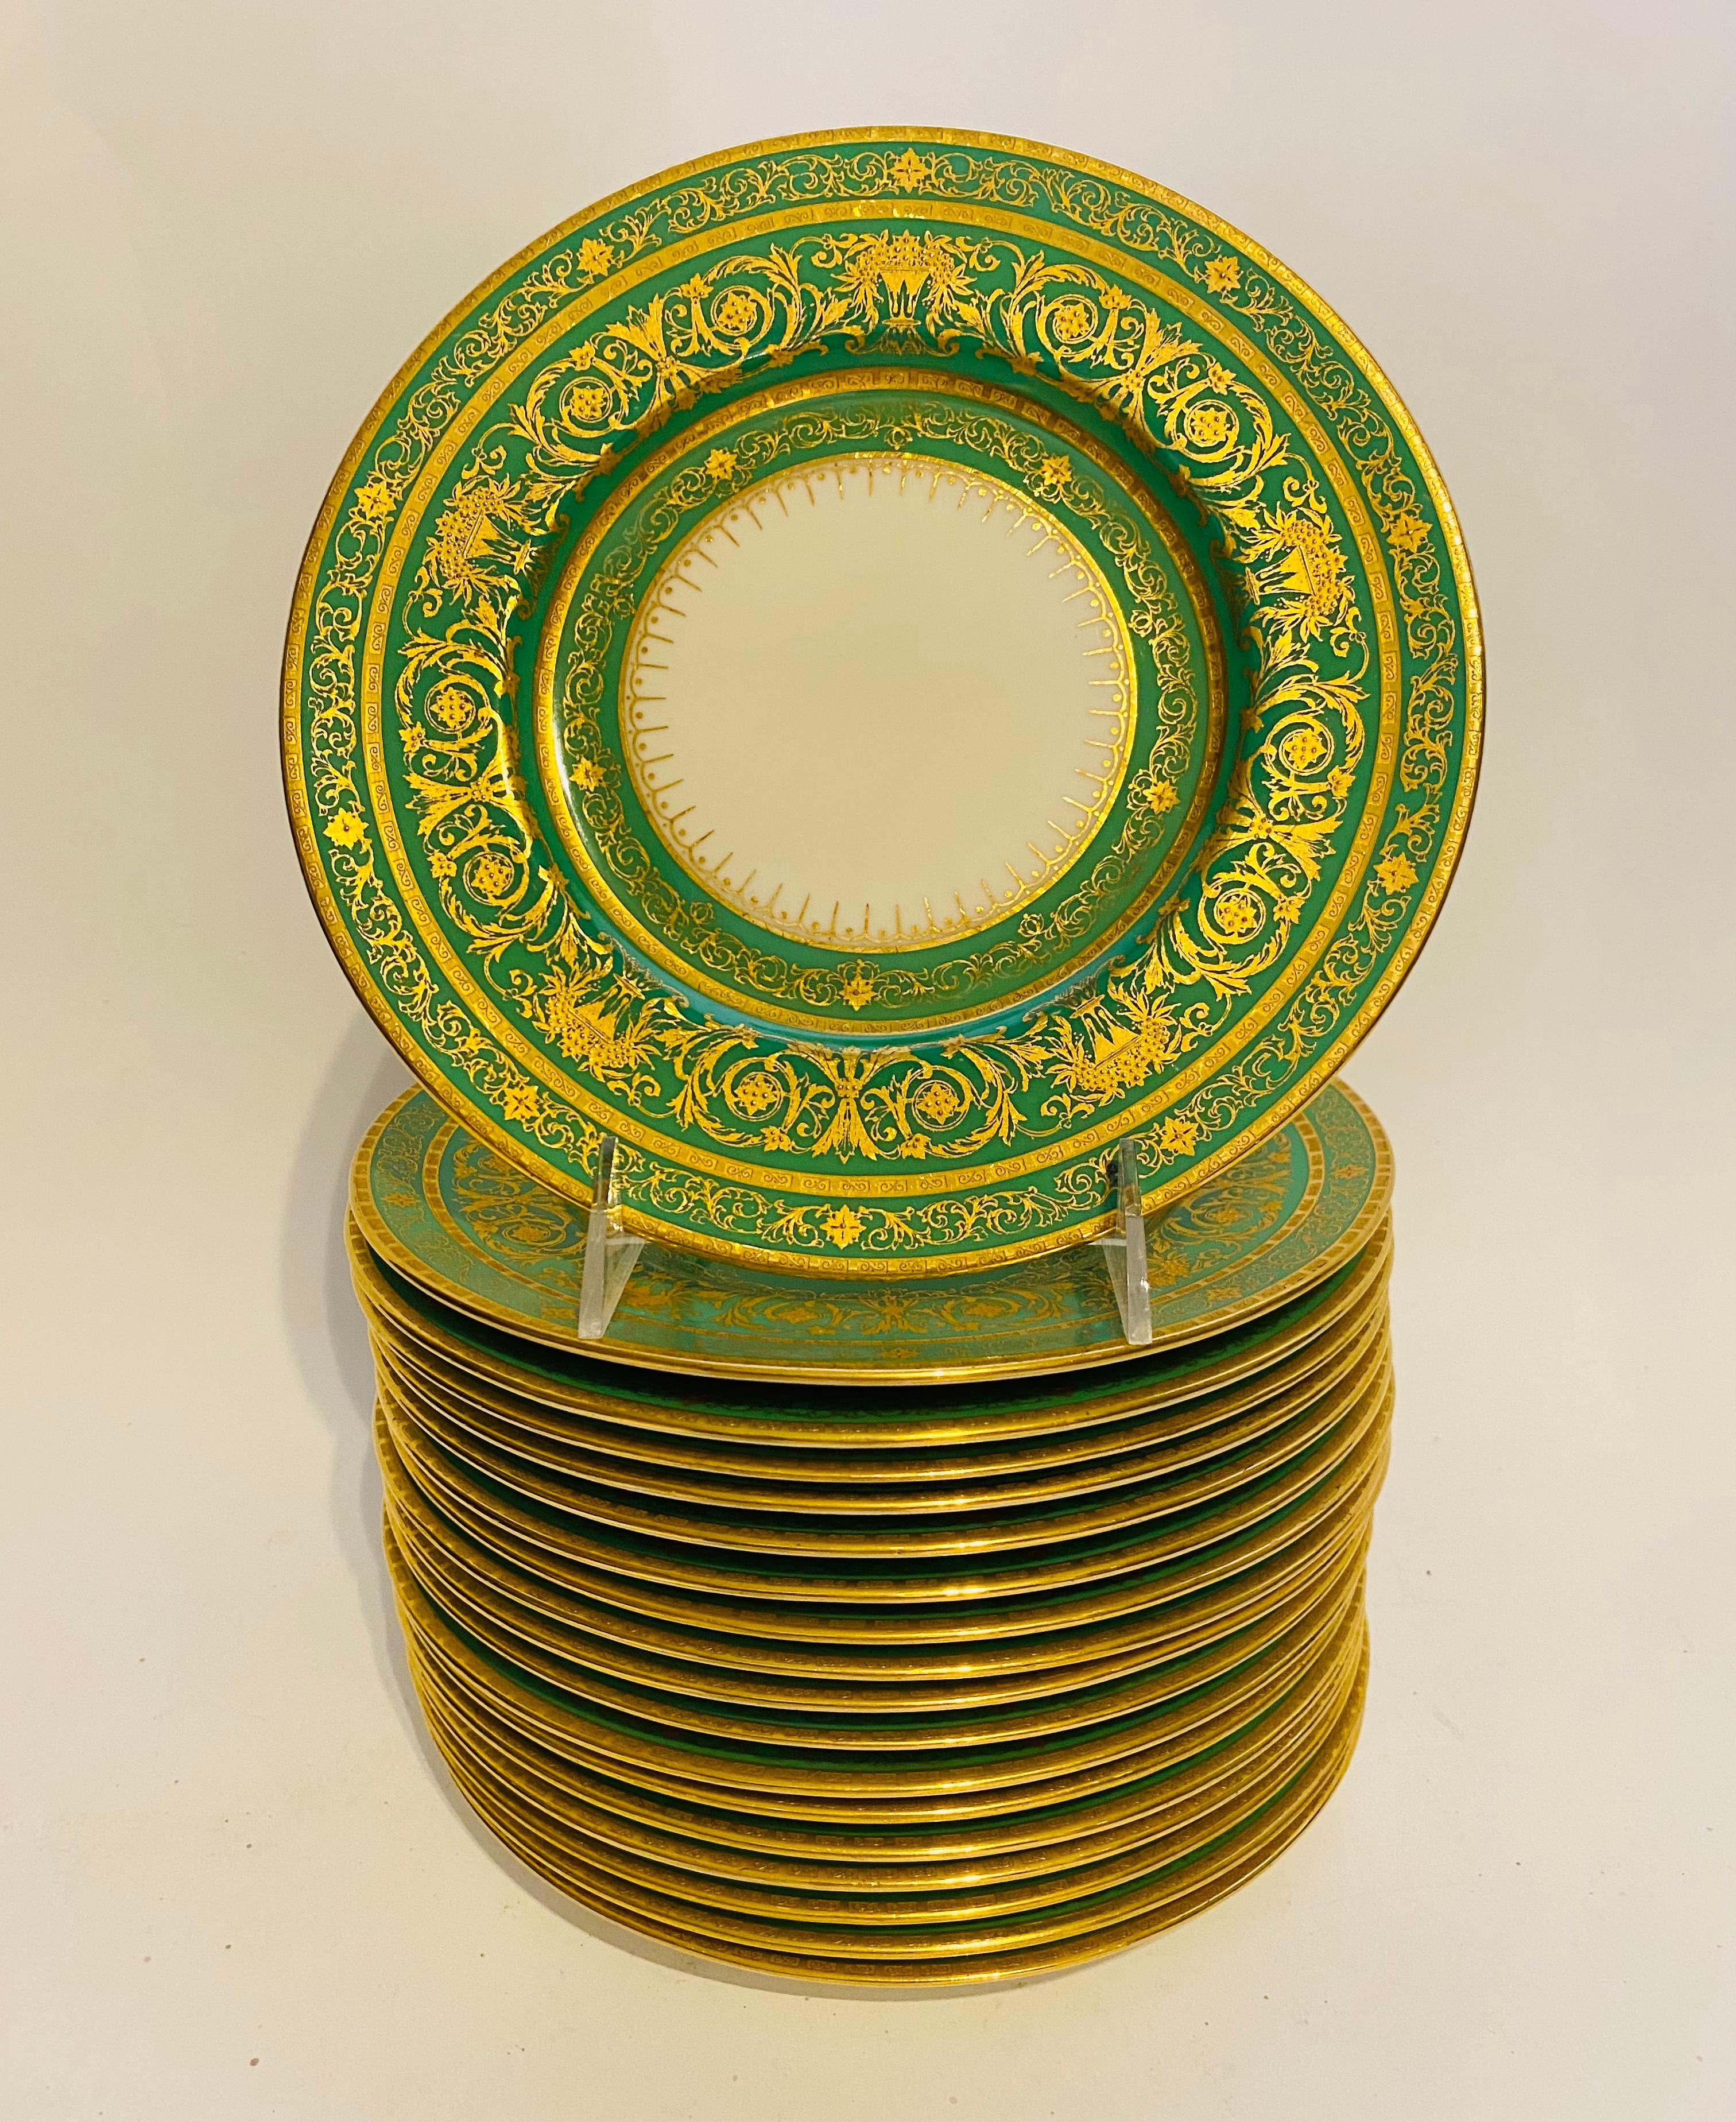 Early 20th Century Set of 18 Green & Heavily Gilt Encrusted Dessert/Salad Plates Antique English